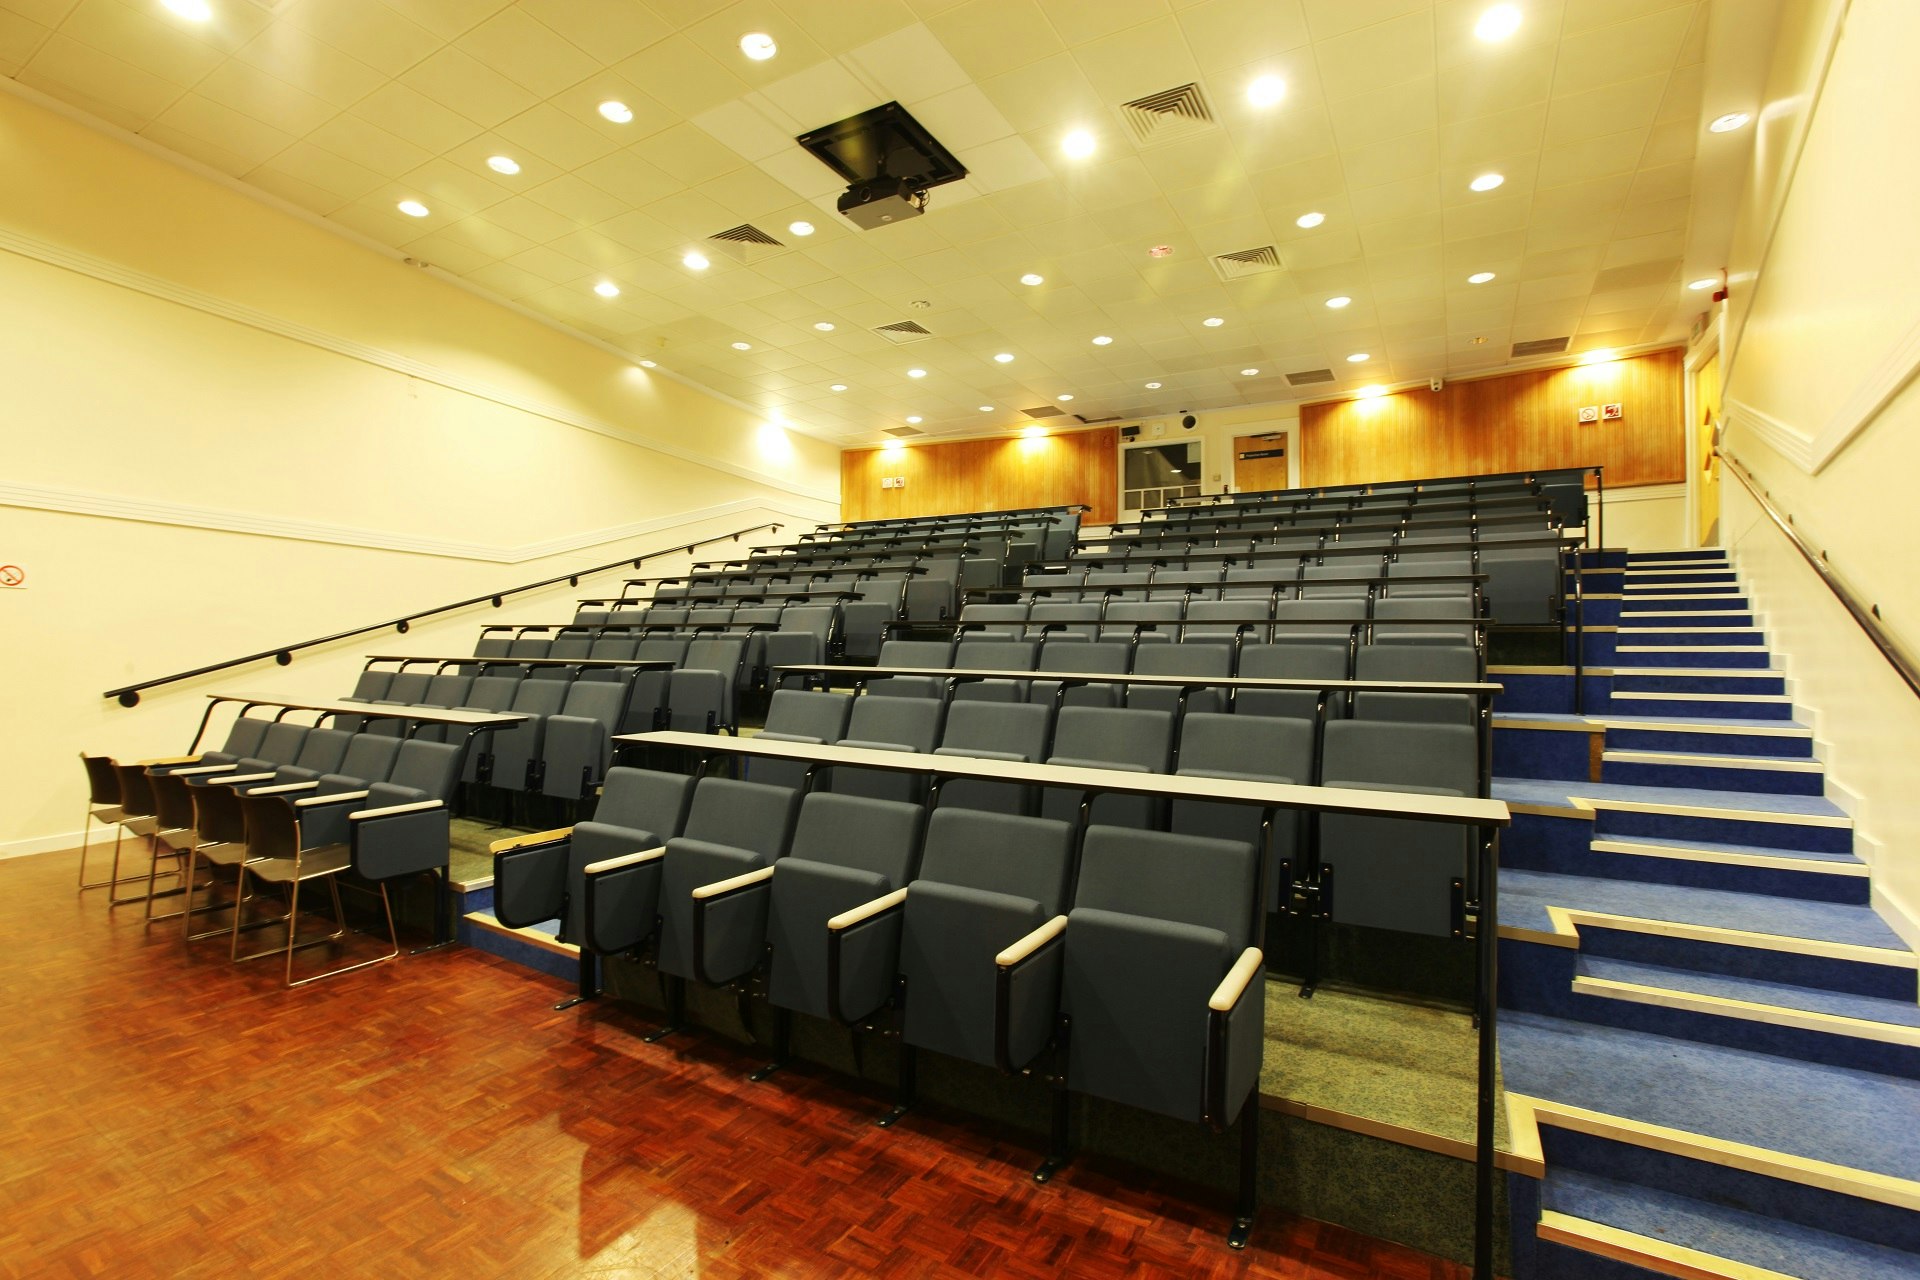 Imperial Venues - Imperial College South Kensington - Classrooms and Lecture Theatres image 4